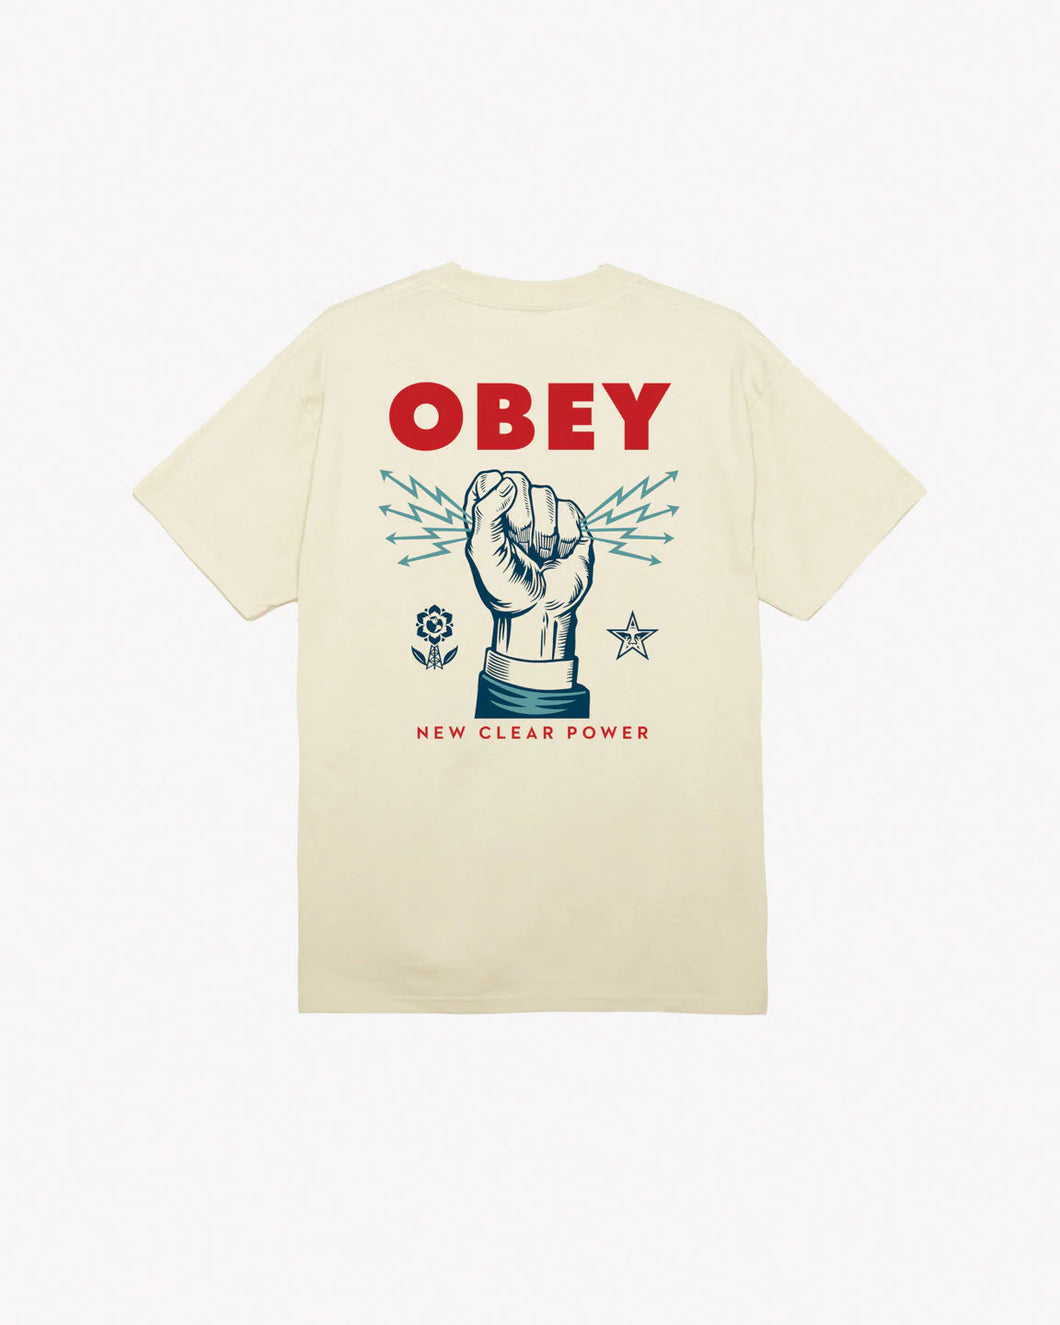 🆕 Obey New Clear Power (Cream)